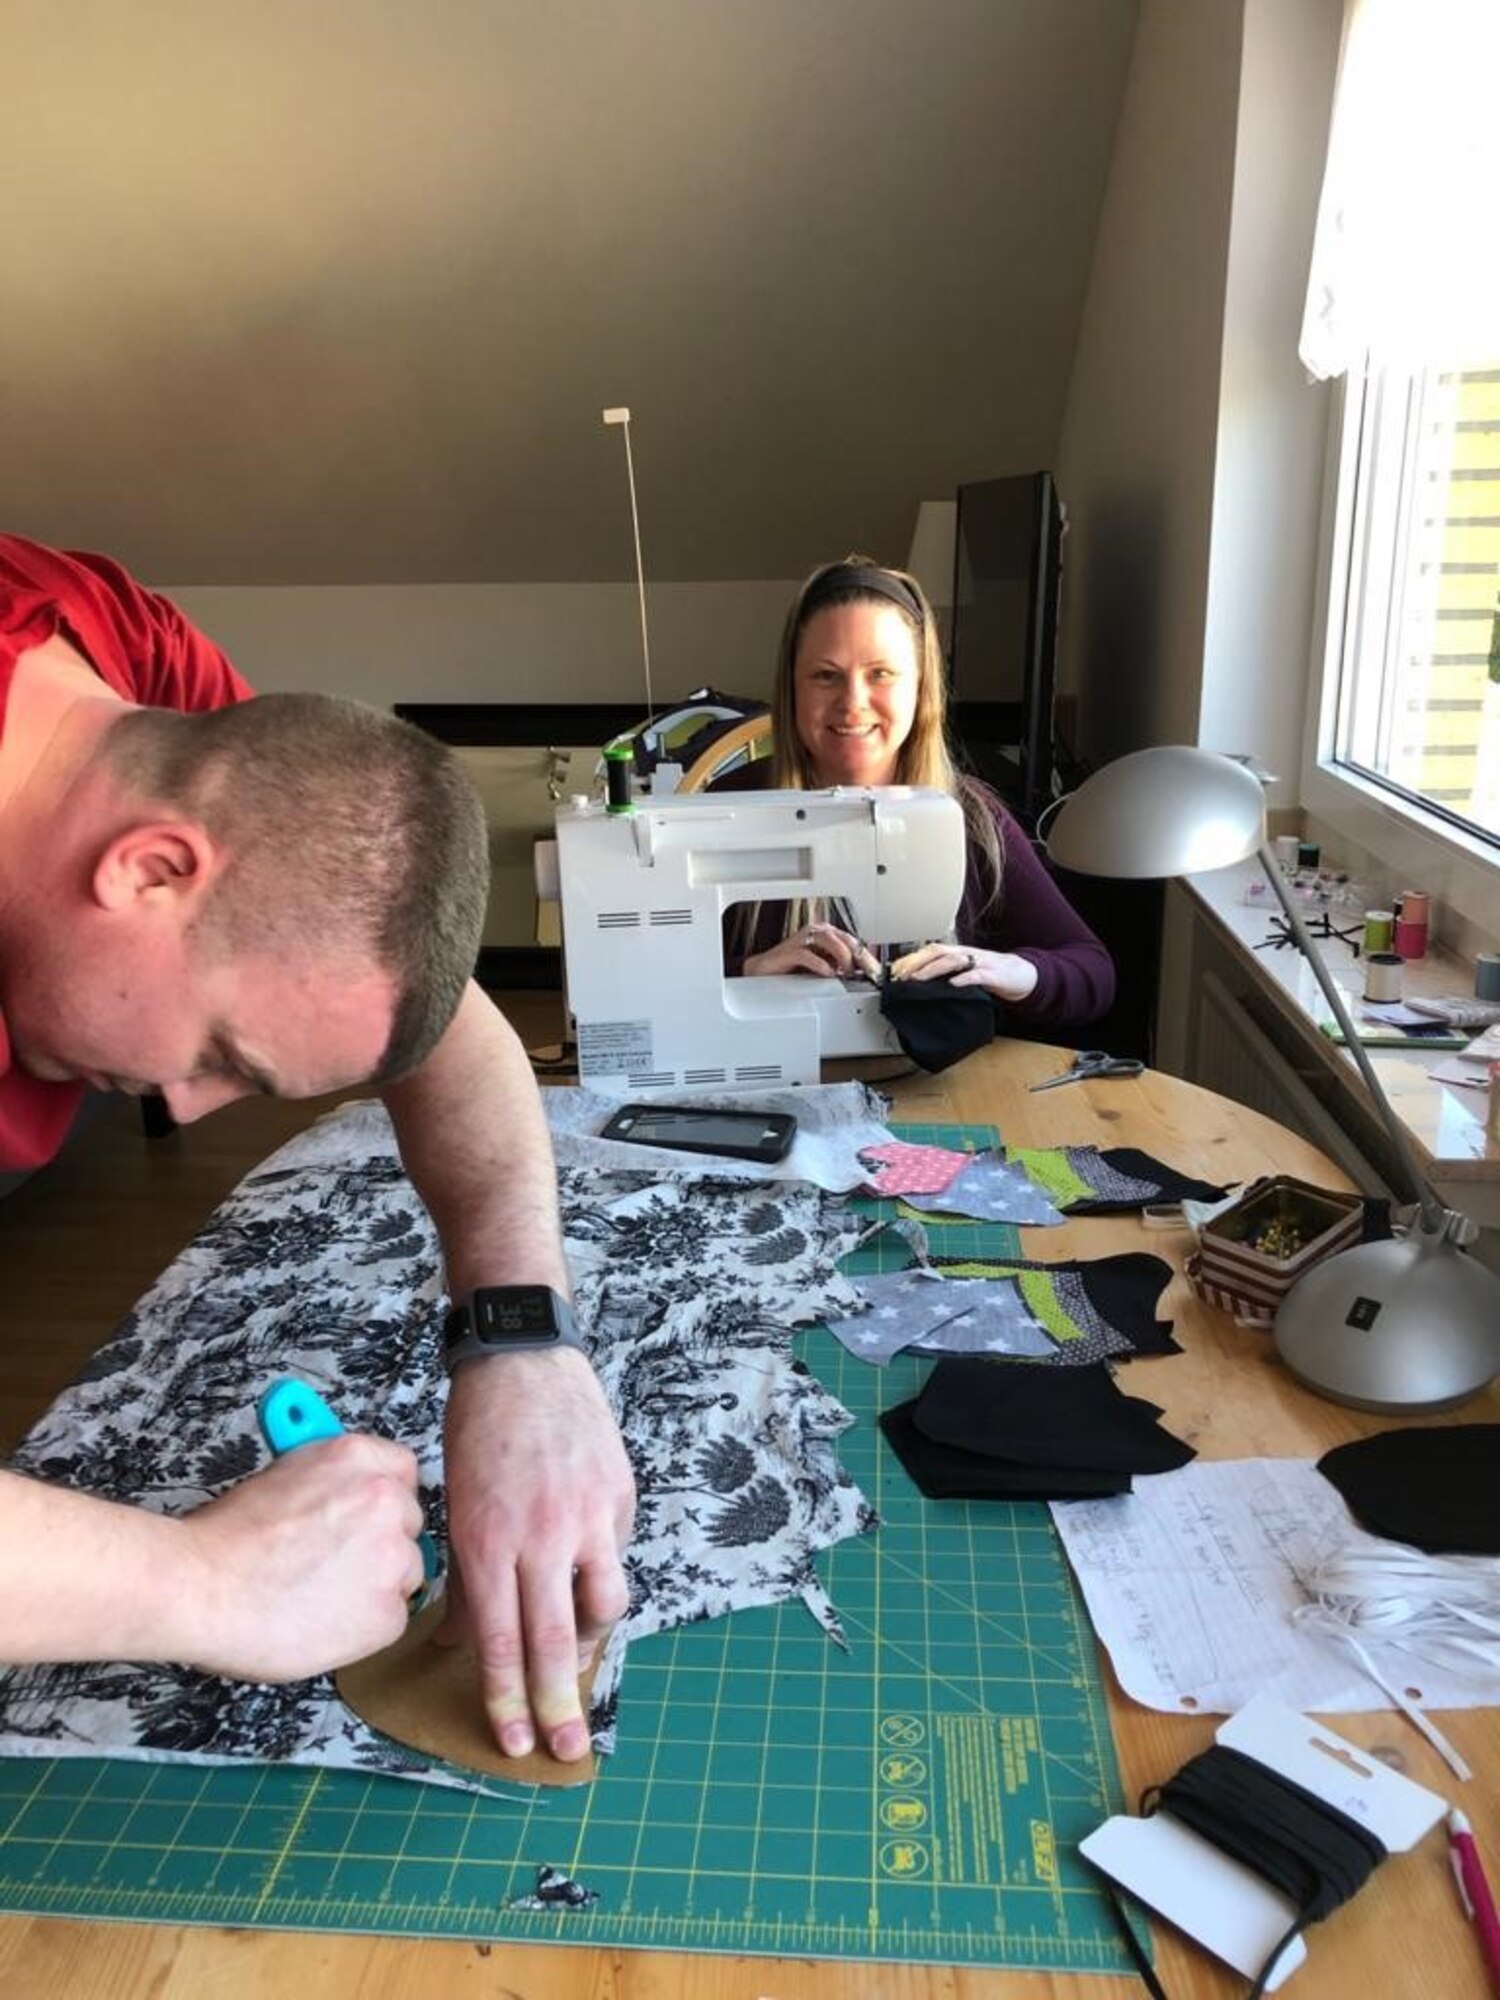 U.S. Air Force Tech. Sgt. Cameron Green, 470th Air Base Squadron paralegal, left, and his wife Katie, right, cut and sew masks for the 470th Air Base Squadron in Geilenkirchen, Germany, April 20, 2020. Sewing masks for the 470th ABS are the Green’s way of giving back to the community during the COVID-19 pandemic. (U.S. Air Force photo courtesy of Master Sgt. David Zamora-Alvarez)